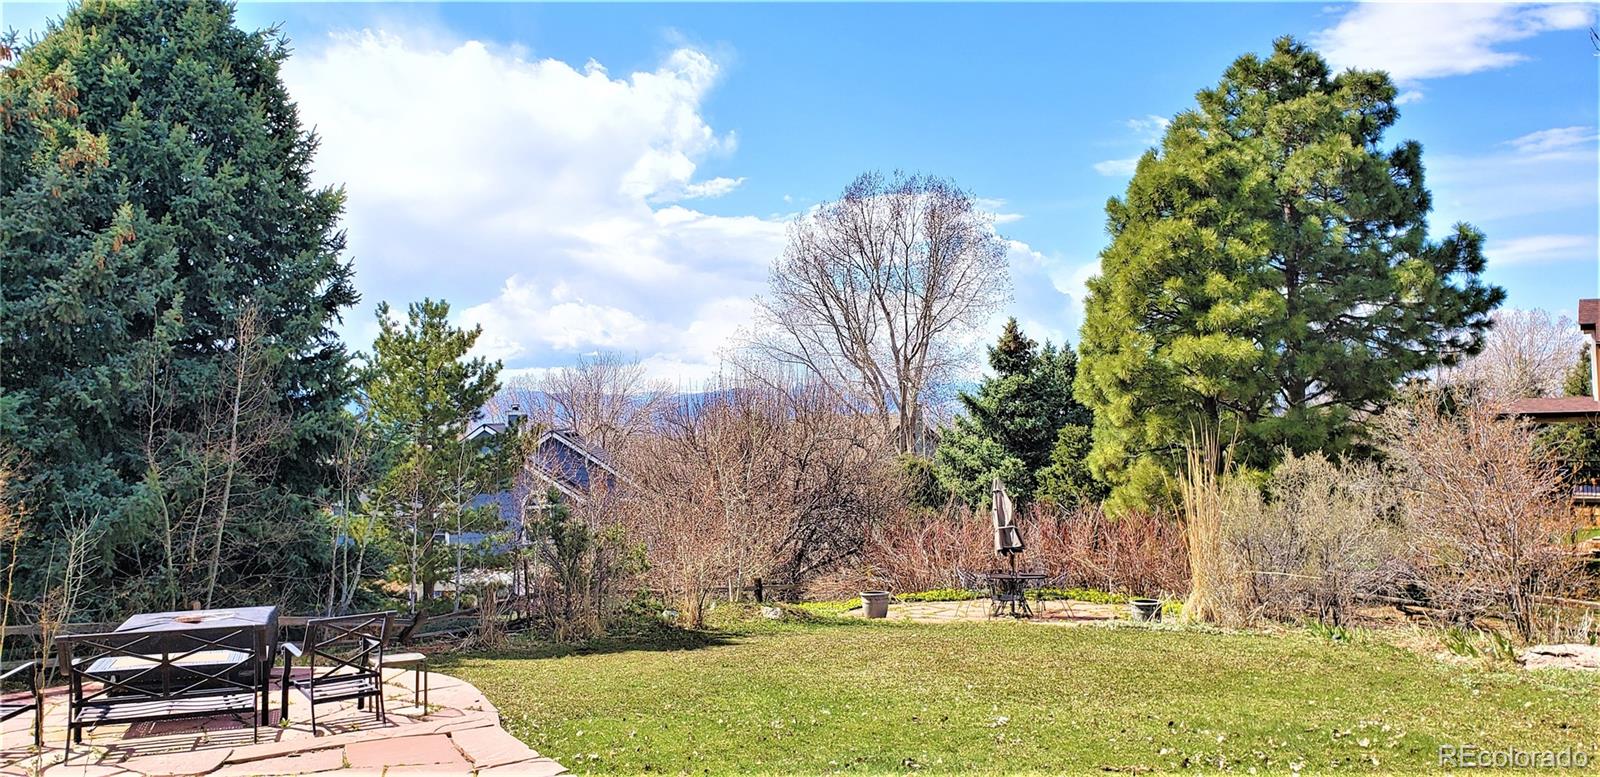 Mountain Views & Lush, Private 1/4 acre lot. Made for entertaining Spacious Deck next to house + Expanded Flagstone Patio by deck + 2nd Flagstone Patio encircled with lush privacy bushes- *All perfect for entertaining!